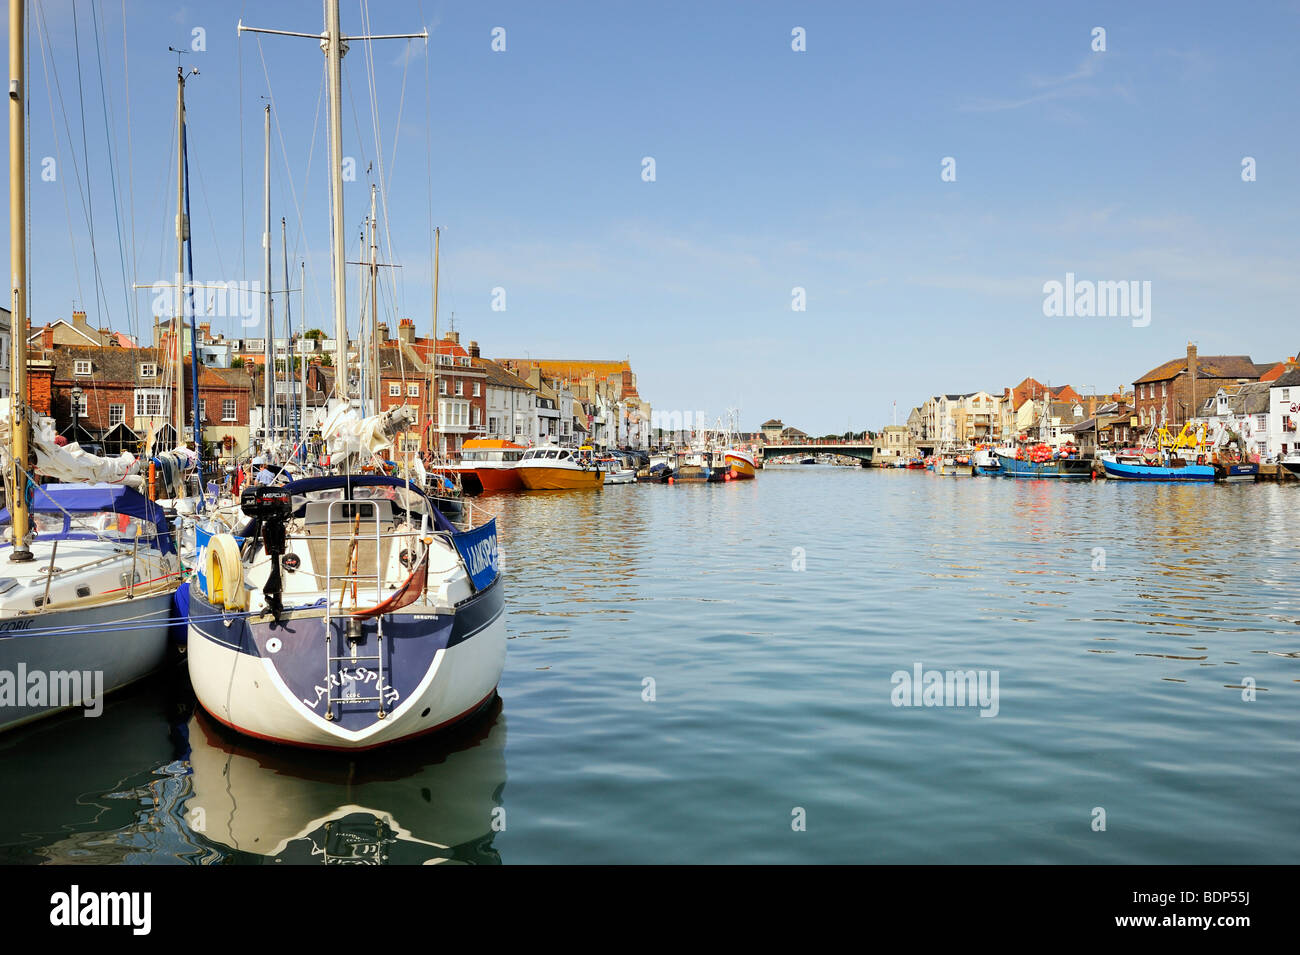 Sailboats docked in the old port of Weymouth, Dorset, England, UK, Europe Stock Photo